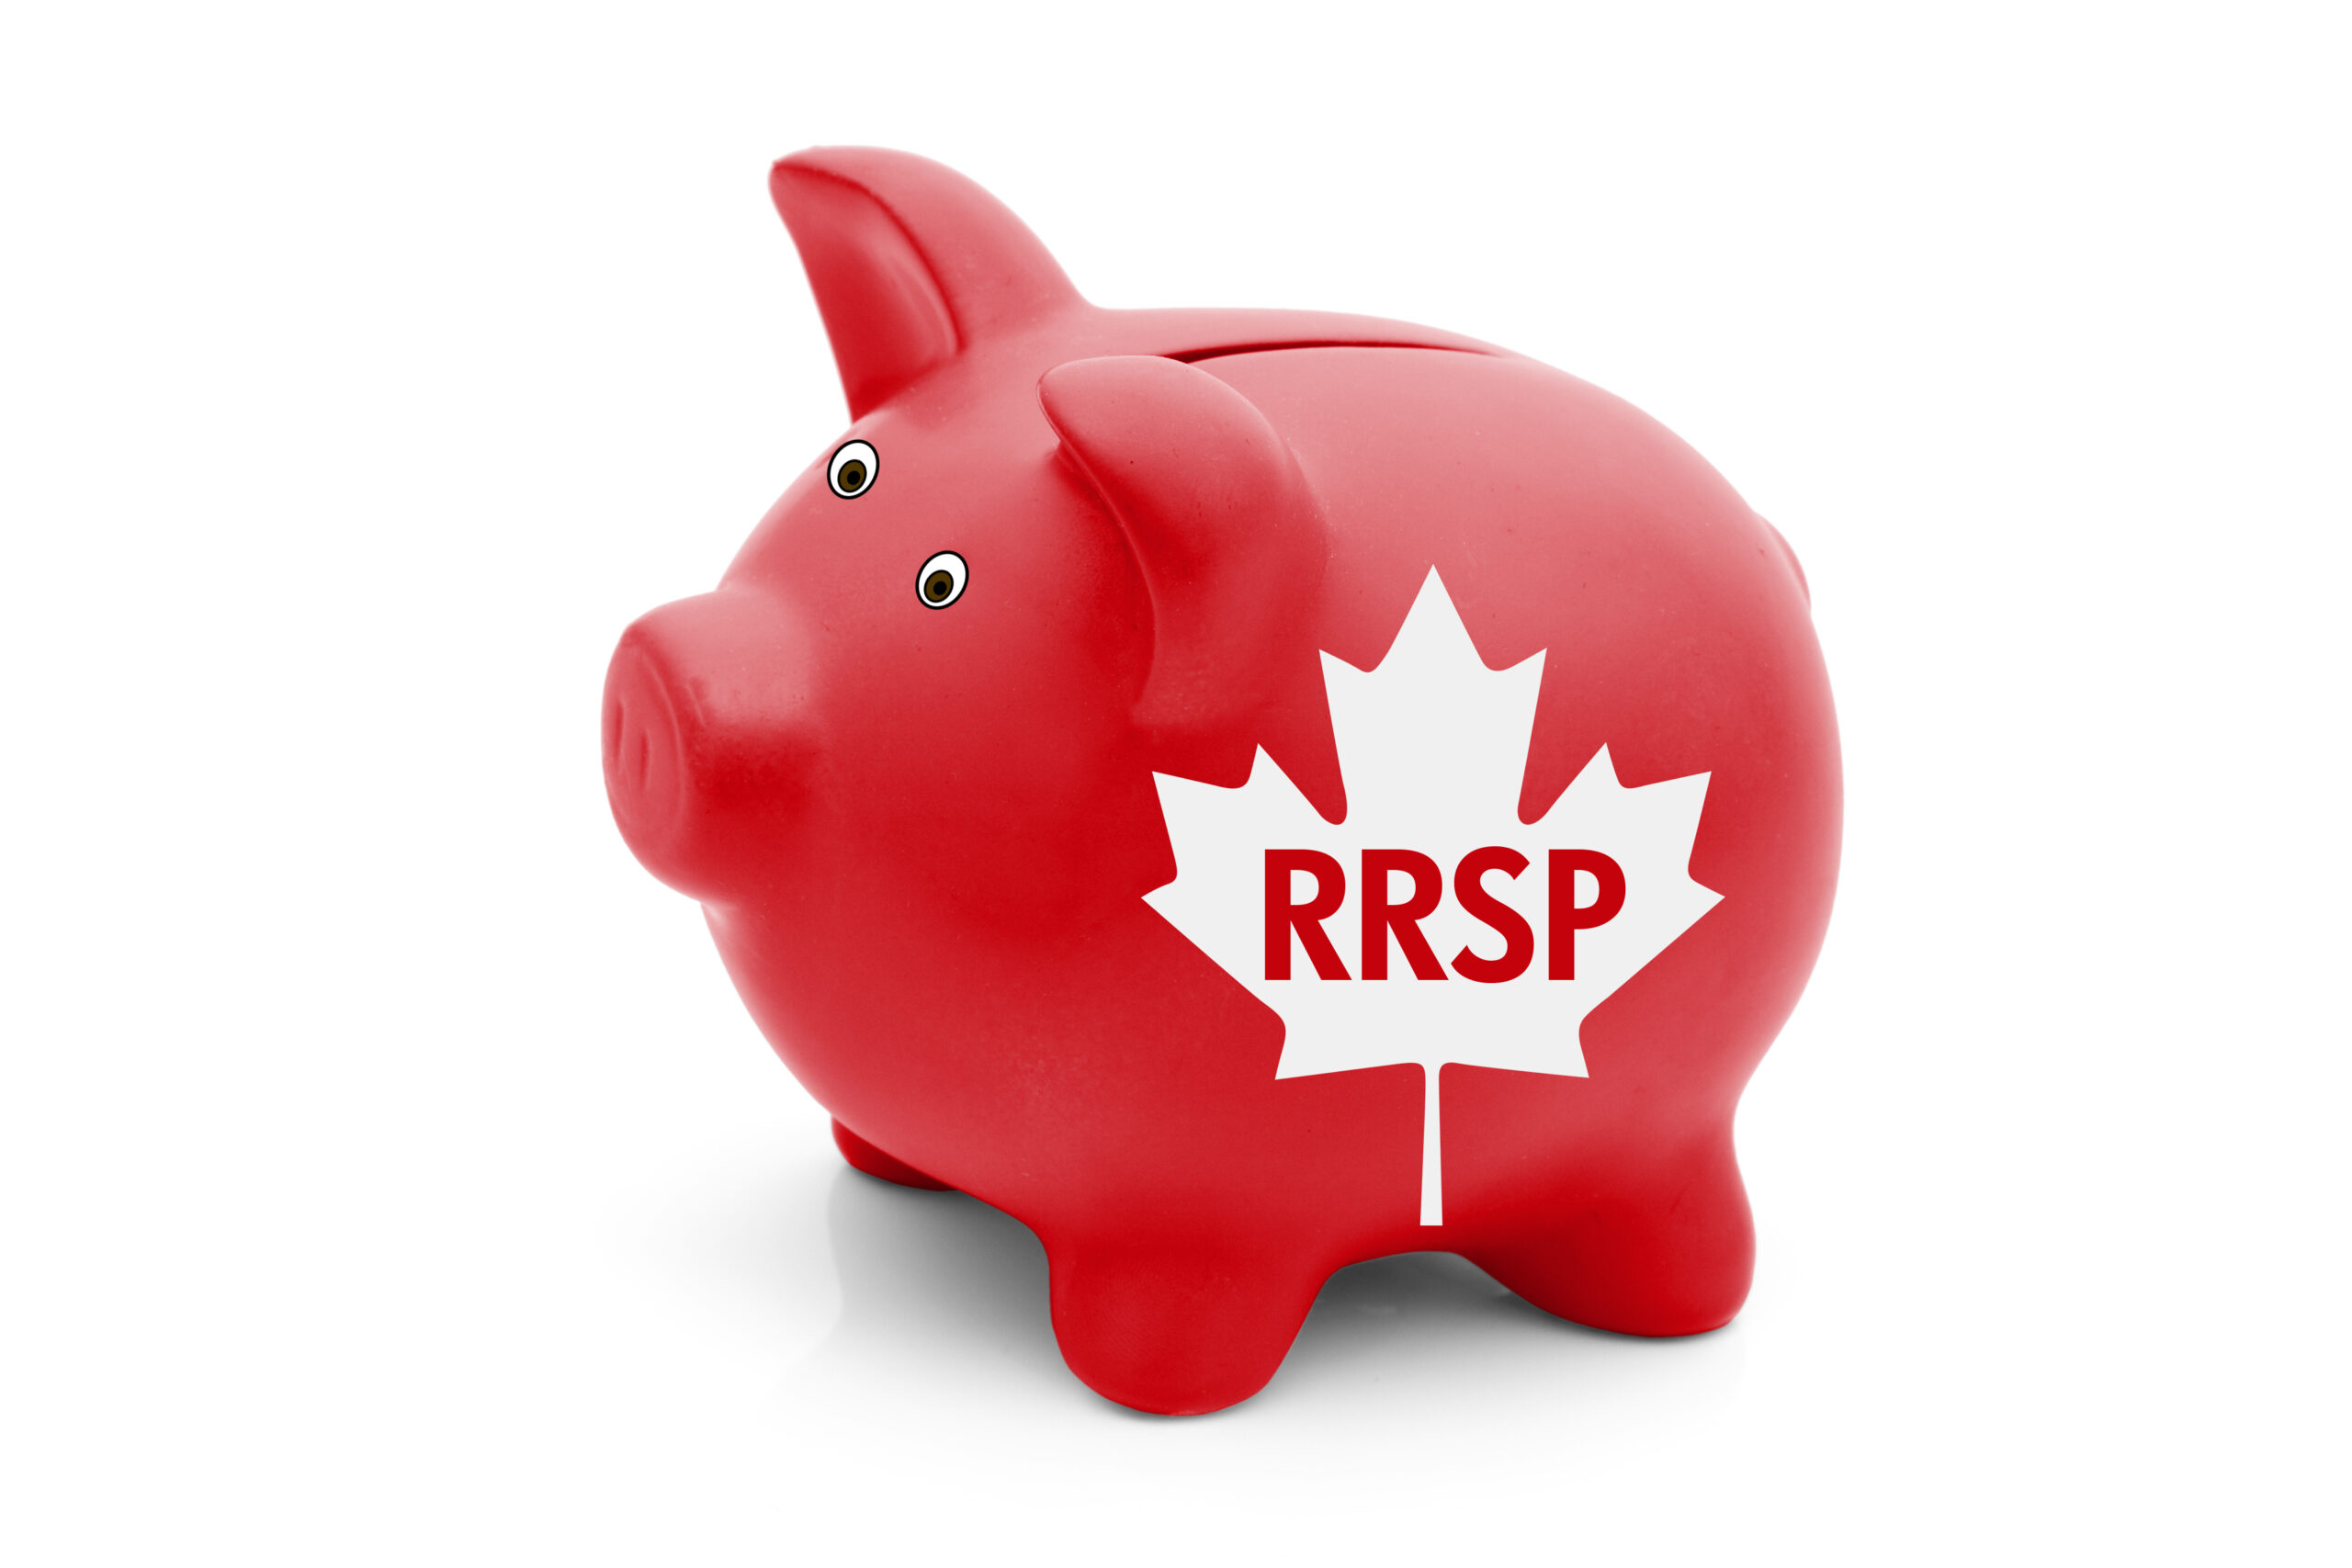 What are the Benefits of RRSP?